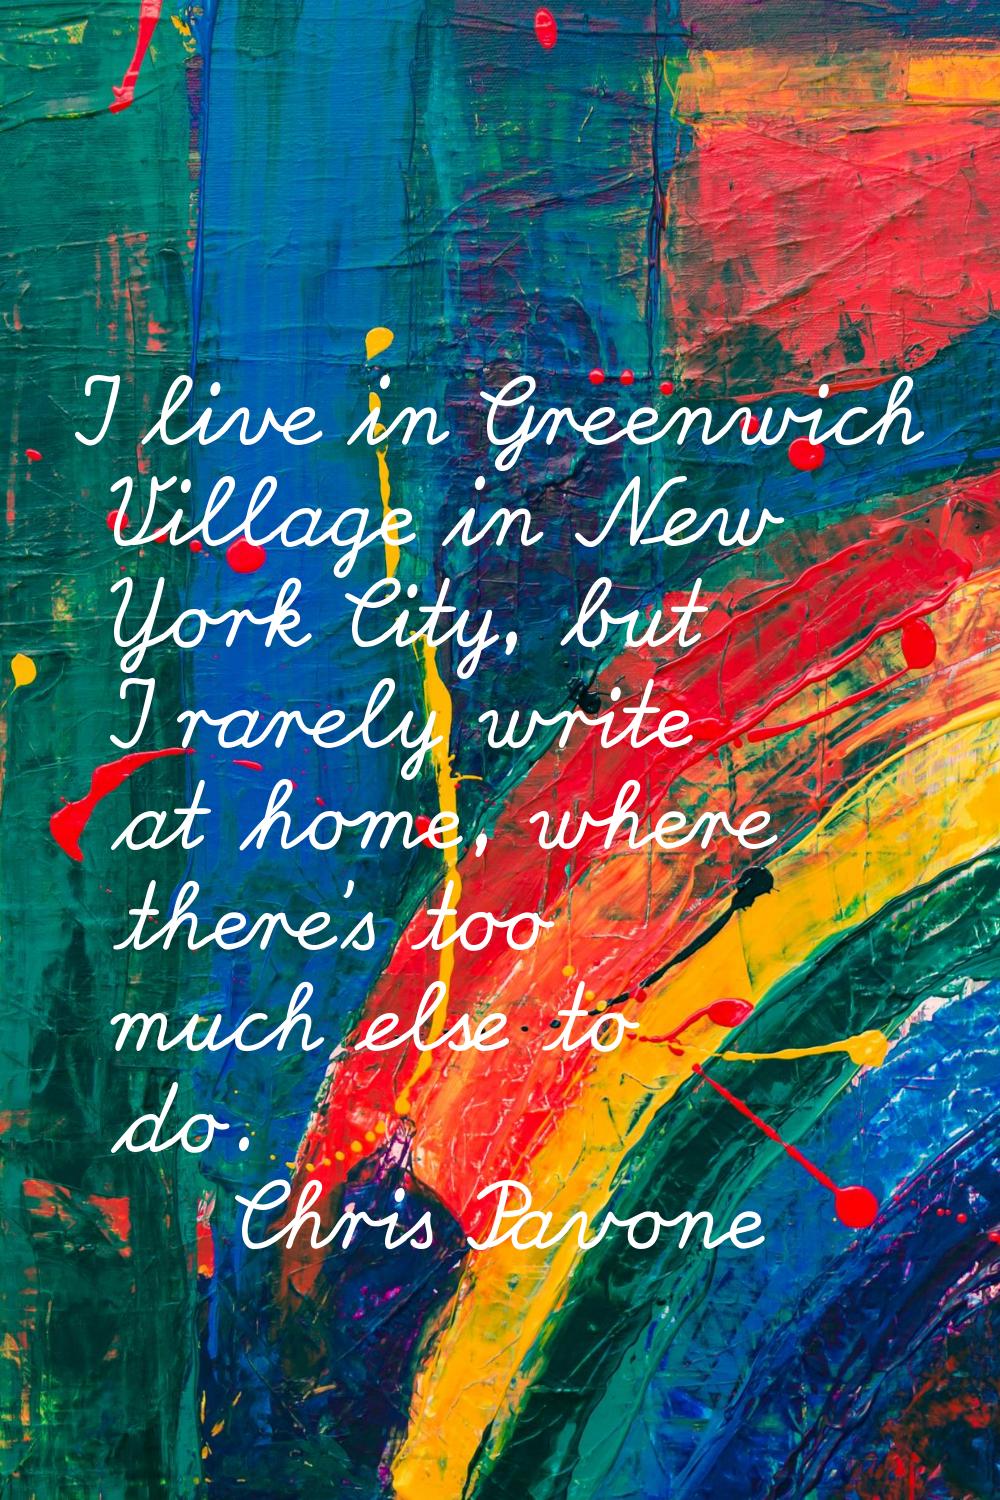 I live in Greenwich Village in New York City, but I rarely write at home, where there's too much el